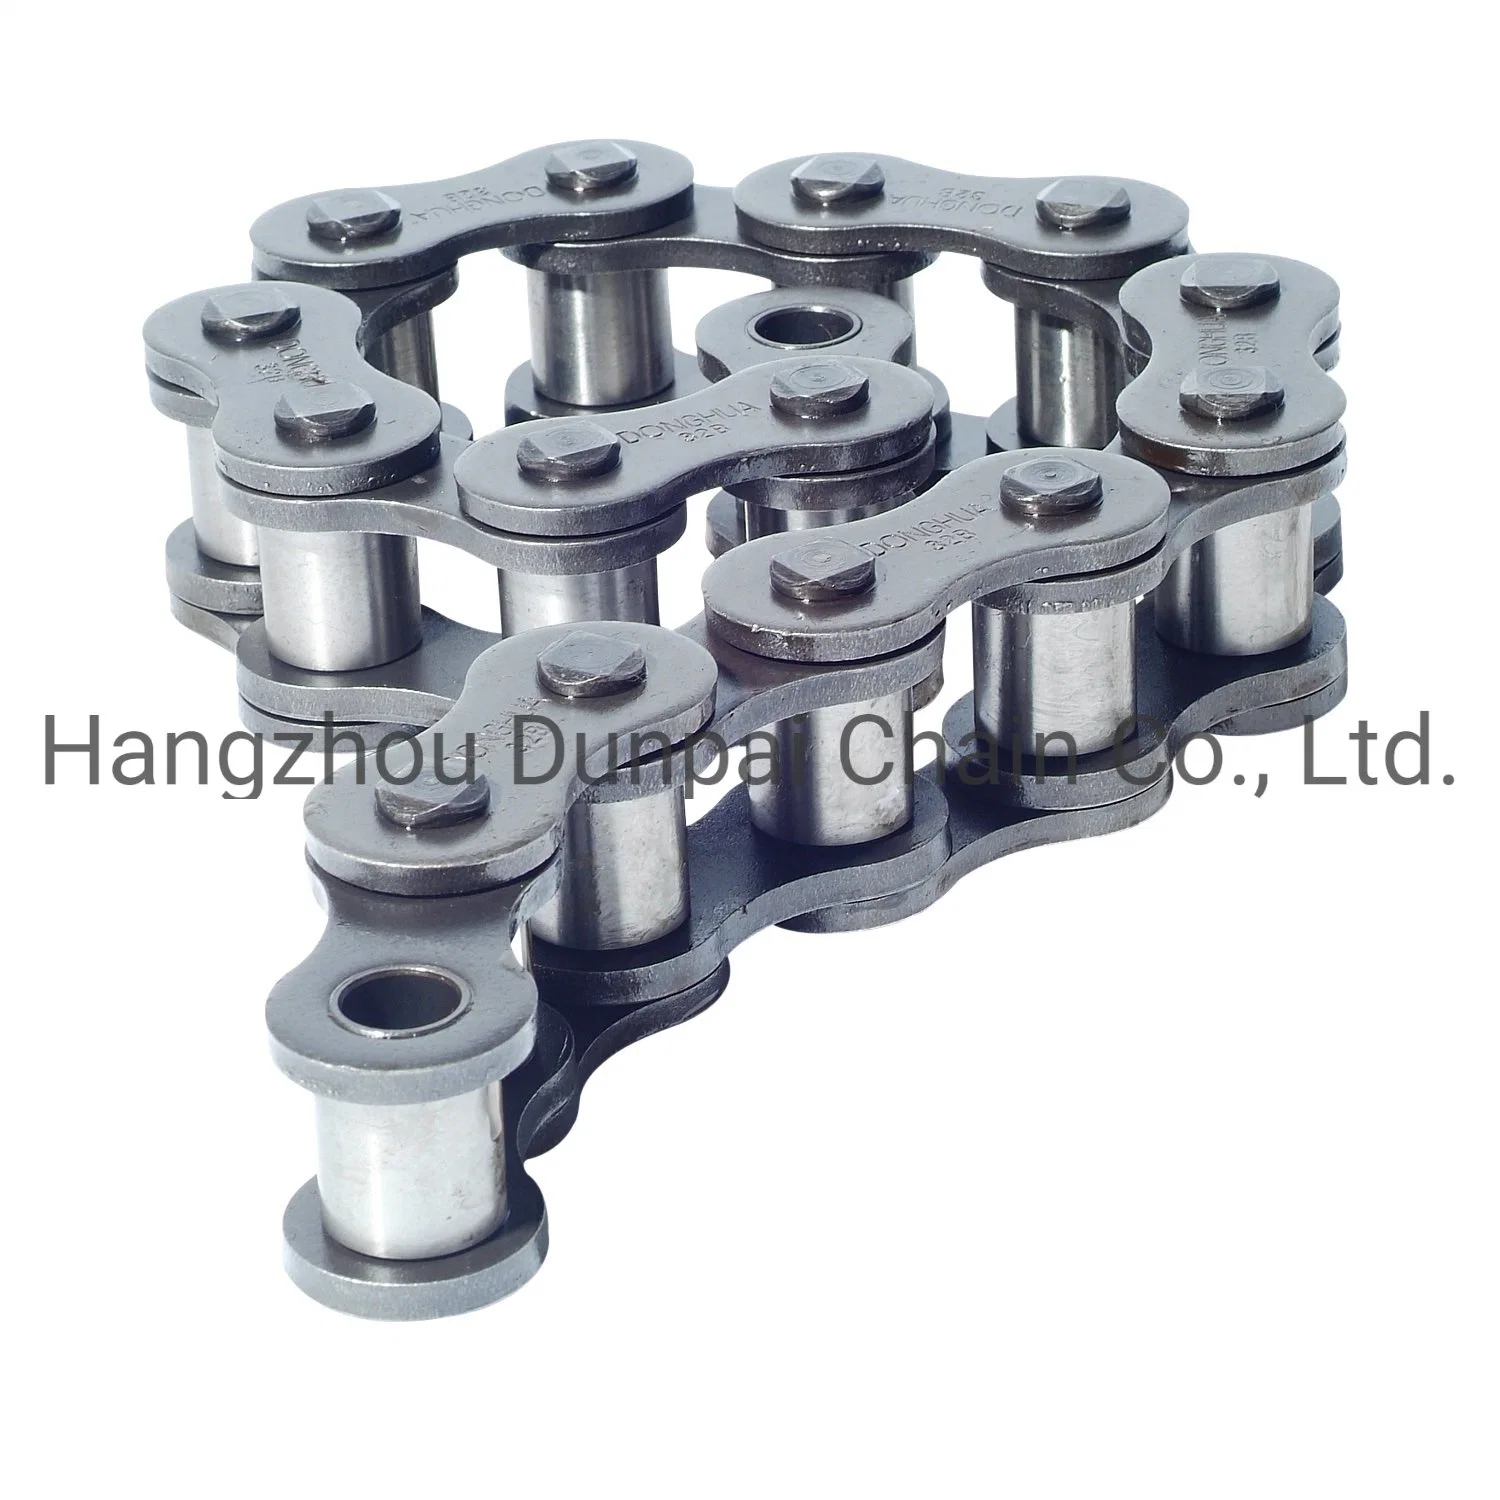 Transmission Conveyor Motorcycle/Timing /Bicycle Link Chain Roller Chain /Hollow Chain/ Industrial Steel Pintle Chain